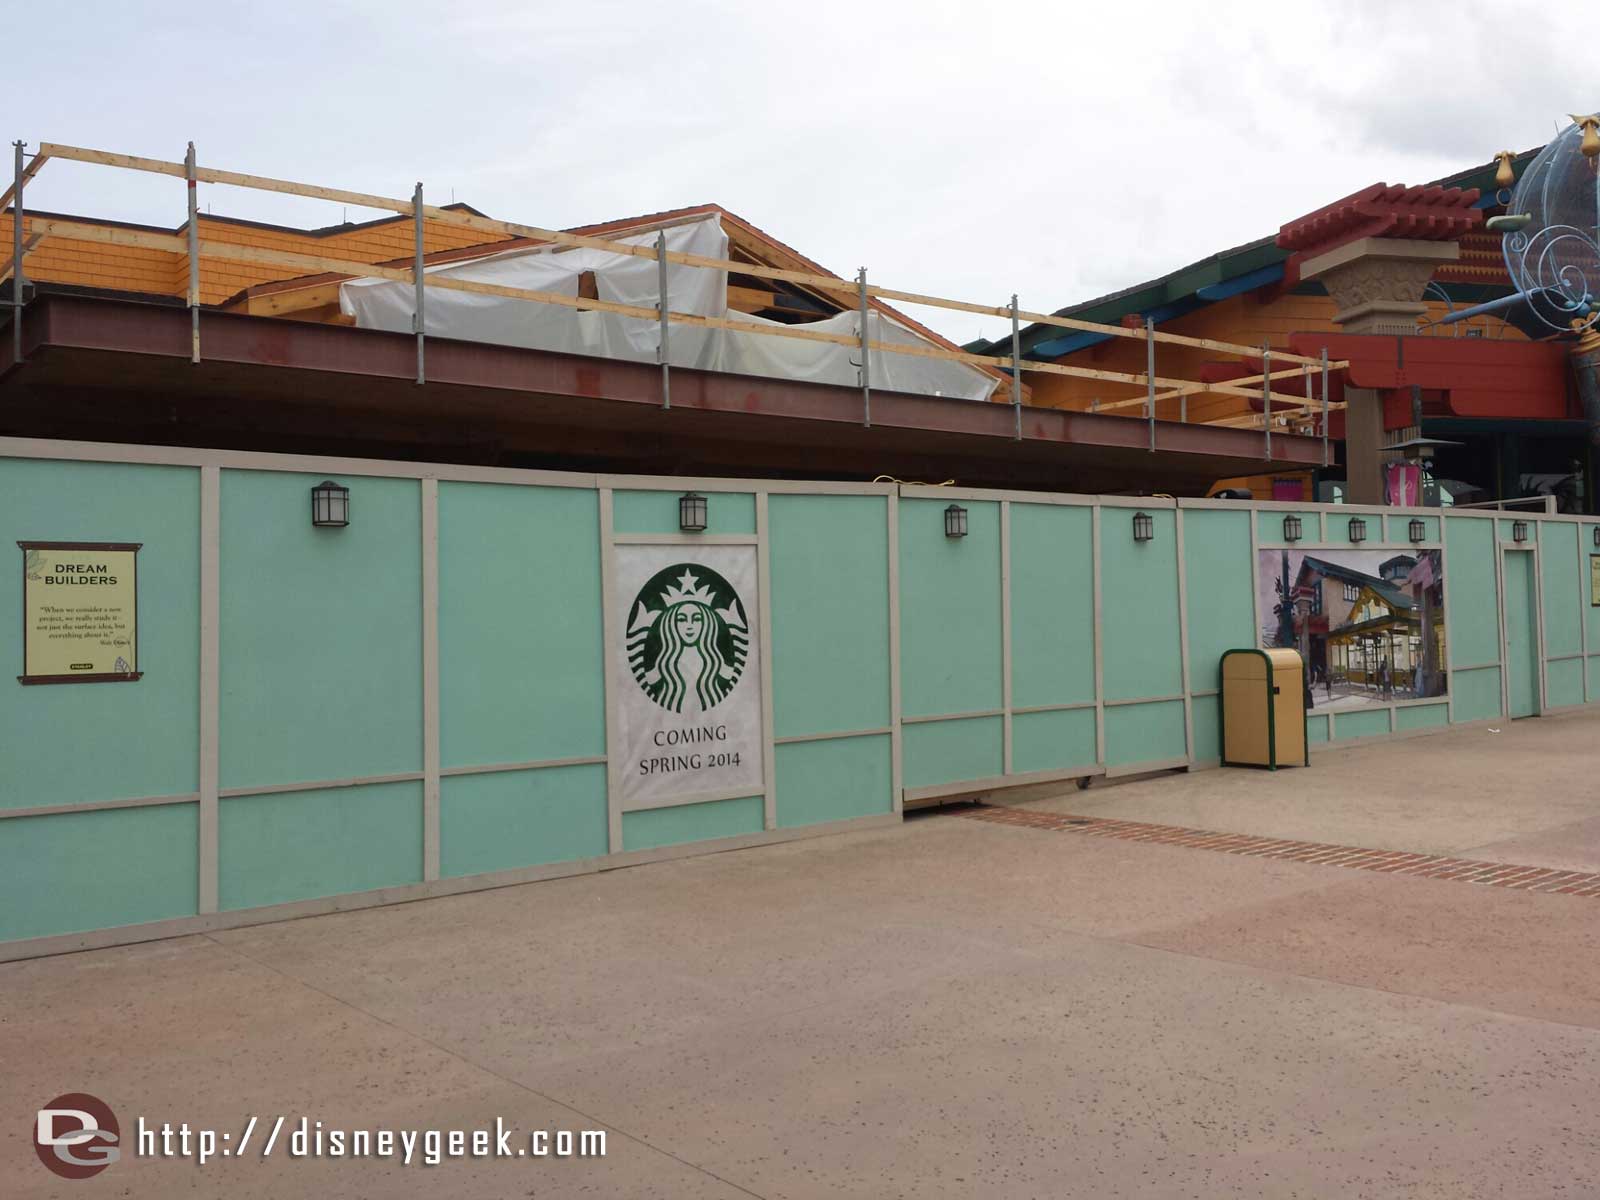 1 of 2 Starbucks under construction, this one by World of Disney